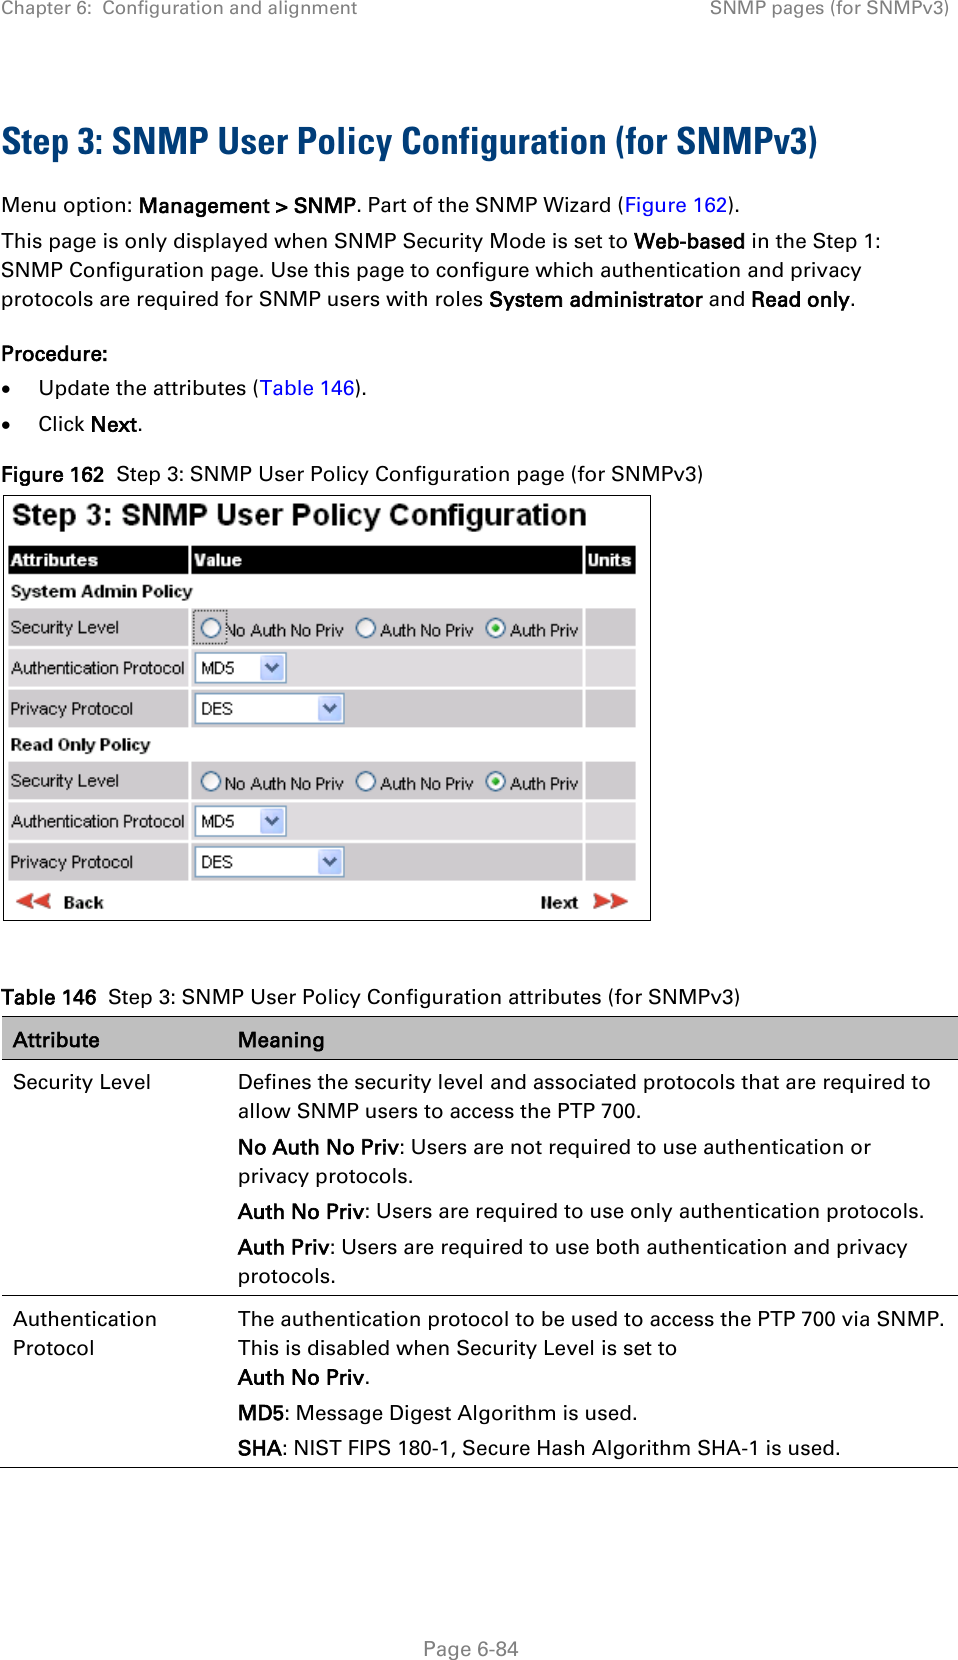 Chapter 6:  Configuration and alignment SNMP pages (for SNMPv3)  Step 3: SNMP User Policy Configuration (for SNMPv3) Menu option: Management &gt; SNMP. Part of the SNMP Wizard (Figure 162). This page is only displayed when SNMP Security Mode is set to Web-based in the Step 1: SNMP Configuration page. Use this page to configure which authentication and privacy protocols are required for SNMP users with roles System administrator and Read only. Procedure: • Update the attributes (Table 146). • Click Next. Figure 162  Step 3: SNMP User Policy Configuration page (for SNMPv3)   Table 146  Step 3: SNMP User Policy Configuration attributes (for SNMPv3) Attribute Meaning Security Level Defines the security level and associated protocols that are required to allow SNMP users to access the PTP 700. No Auth No Priv: Users are not required to use authentication or privacy protocols. Auth No Priv: Users are required to use only authentication protocols. Auth Priv: Users are required to use both authentication and privacy protocols. Authentication Protocol The authentication protocol to be used to access the PTP 700 via SNMP. This is disabled when Security Level is set to Auth No Priv. MD5: Message Digest Algorithm is used. SHA: NIST FIPS 180-1, Secure Hash Algorithm SHA-1 is used.  Page 6-84 